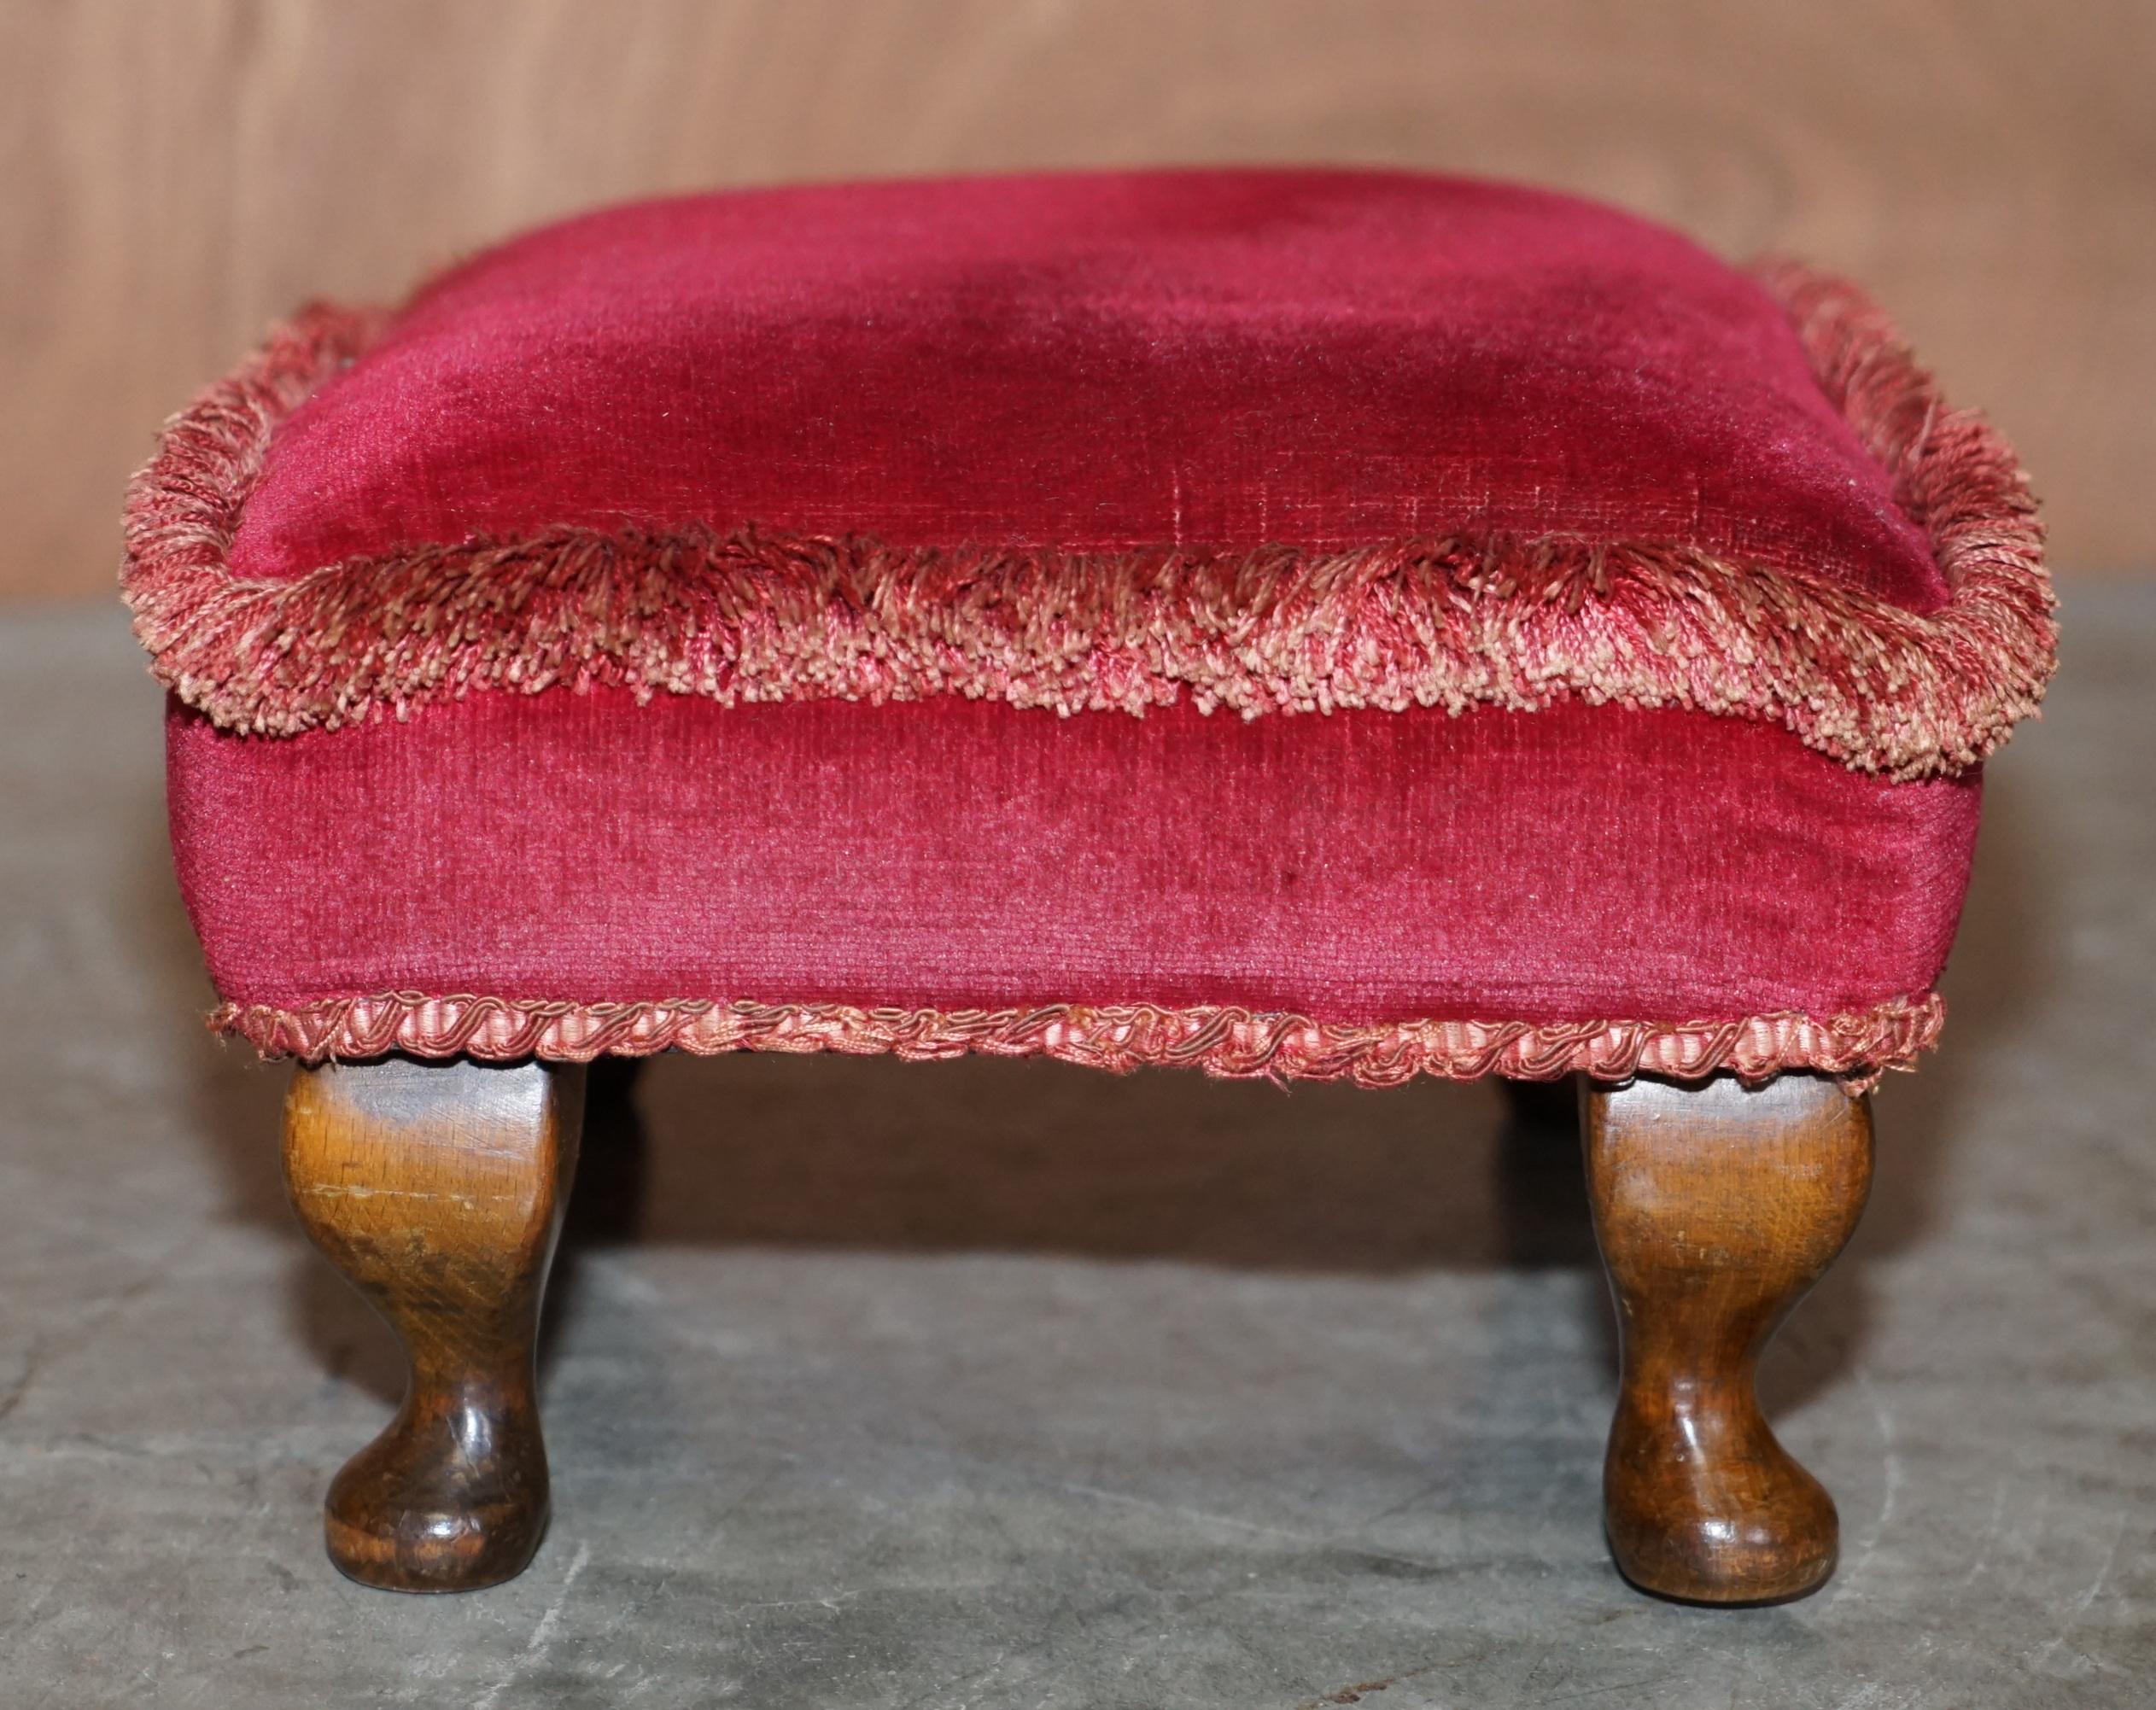 Antique Early Victorian Hardwood Footstool Pink Upholstery for Wingback Armchair 1